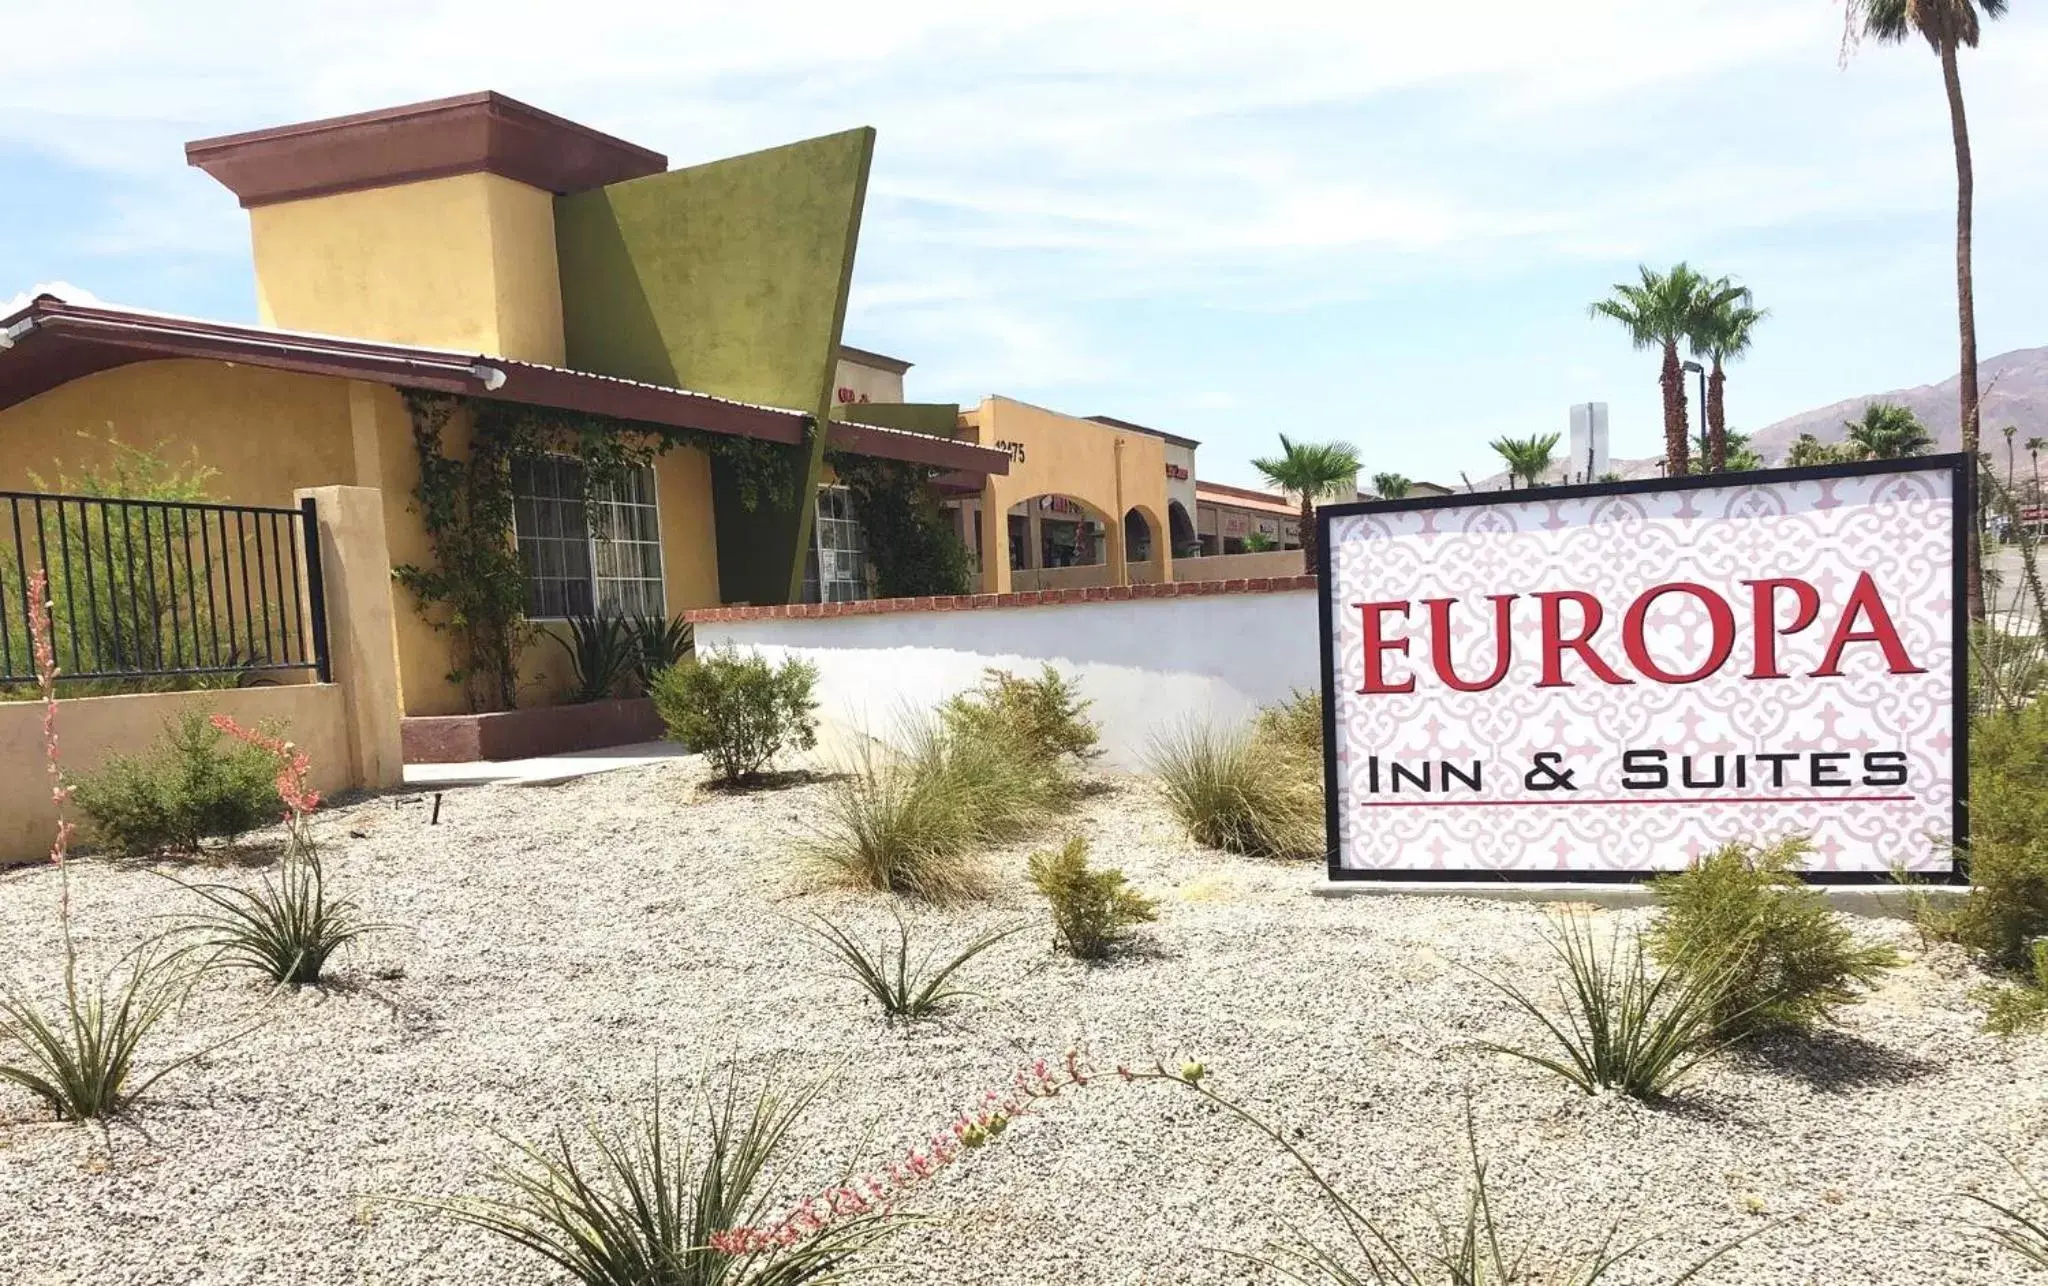 Property Building in Europa Inn & Suites